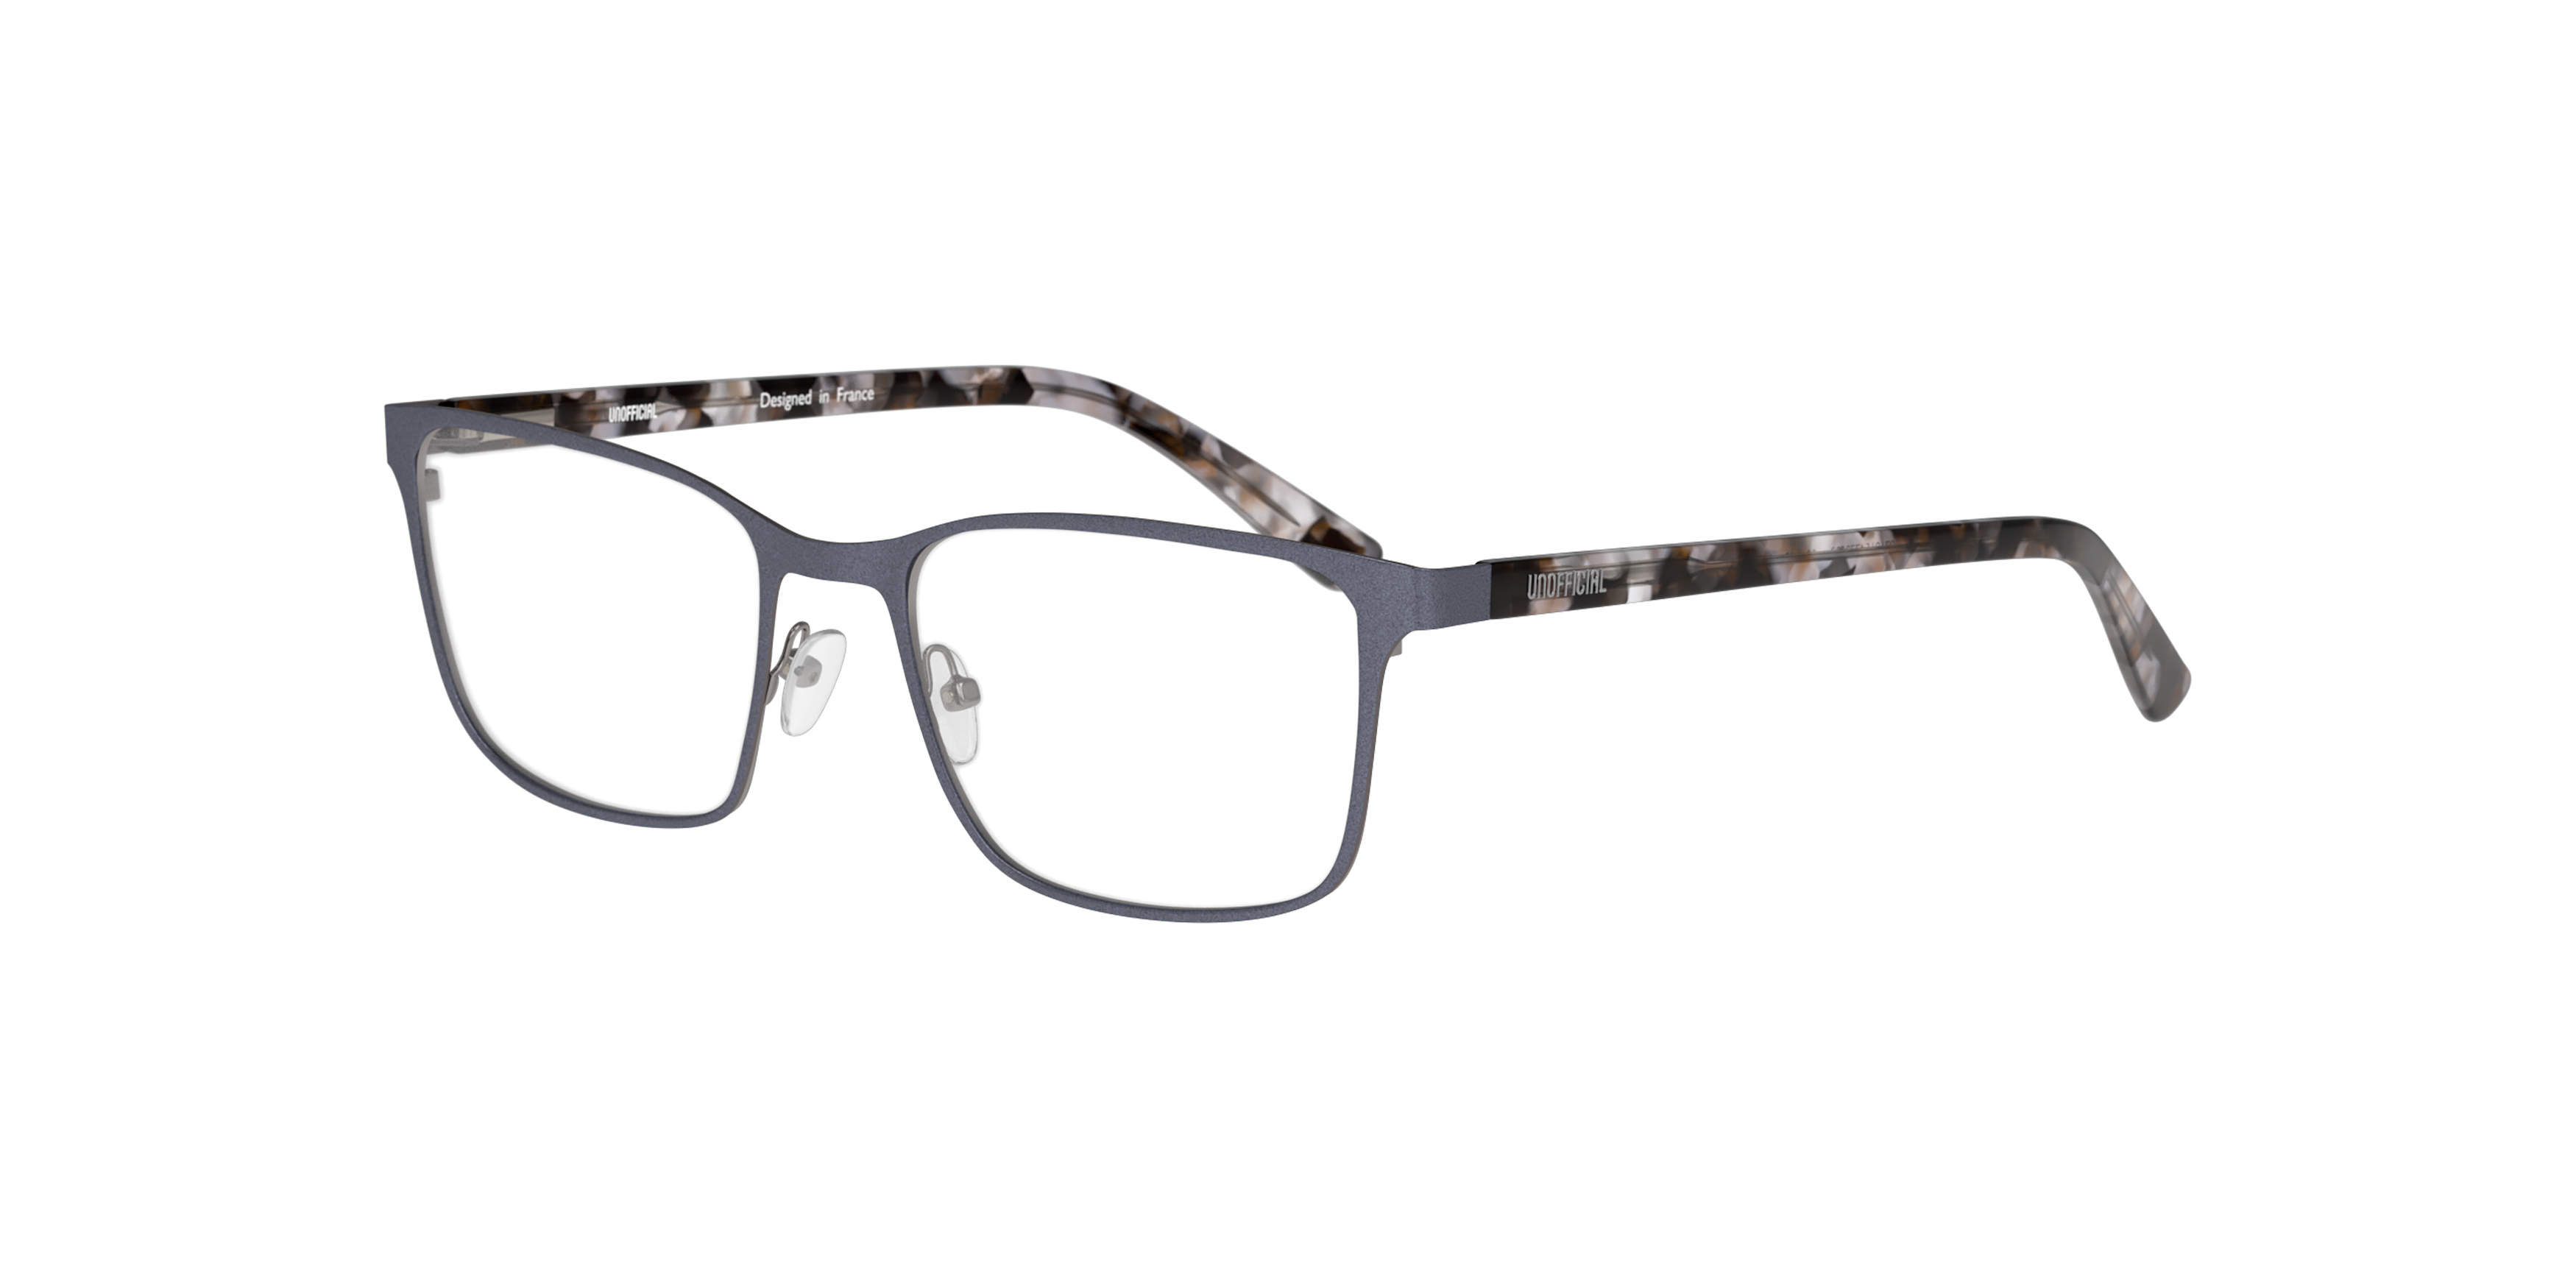 Angle_Left01 Unofficial UNOM0182 Glasses Transparent / Grey